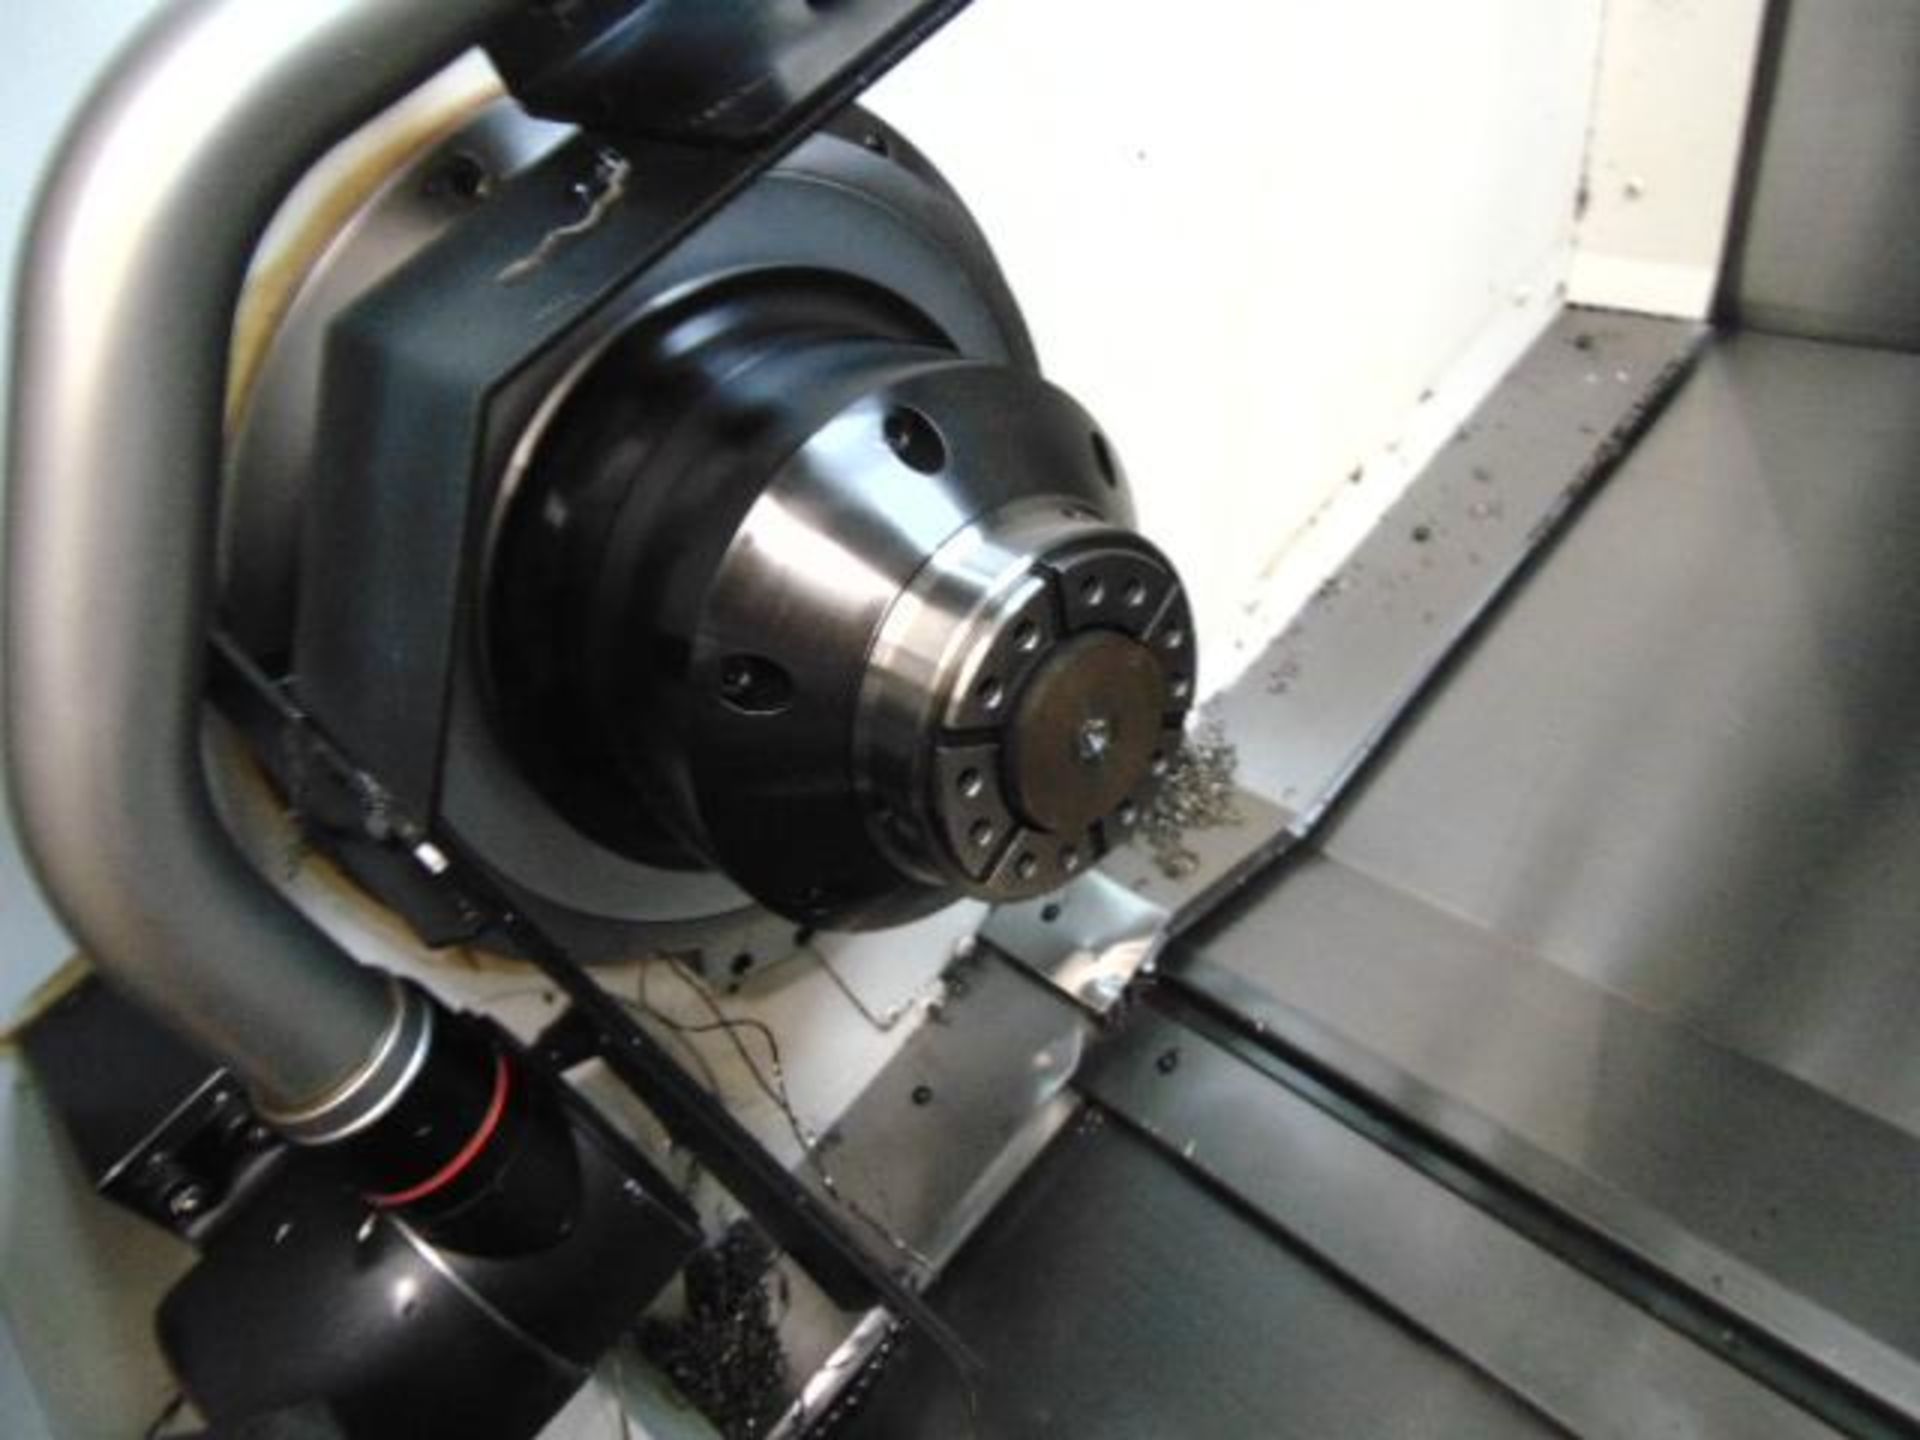 MULTI-AXIS CNC TURNING CENTER, OKUMA MDL. LB3000EXII-MYW 800 SPACE TURN, new 2015, 0SP-P300L CNC con - Image 3 of 24